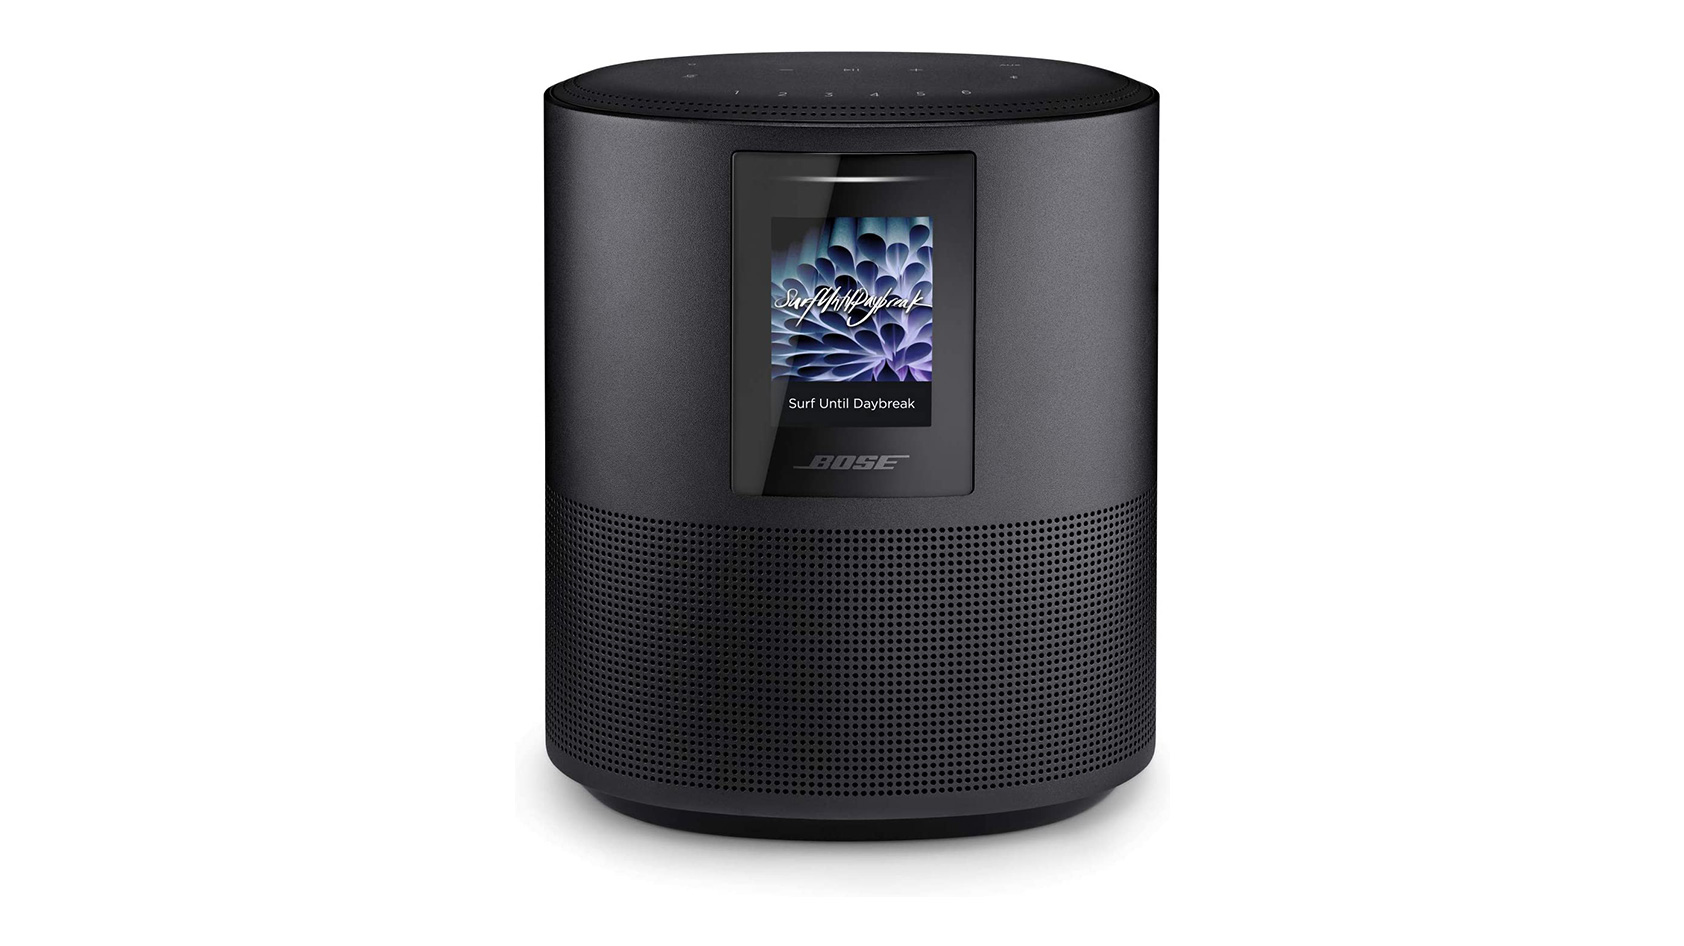 The Bose Home Speaker 500 in black against a white background.